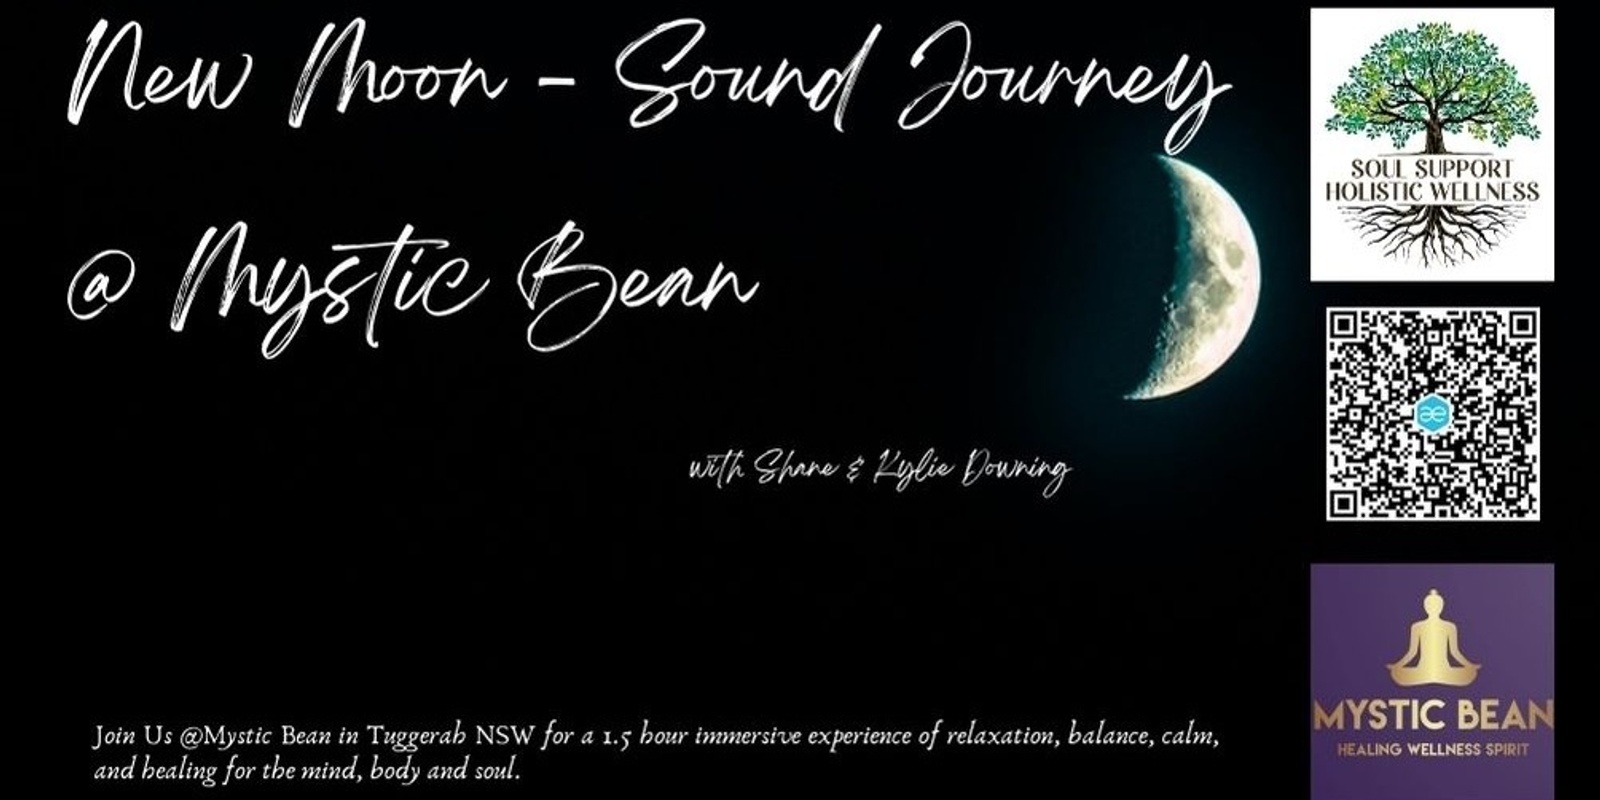 Banner image for New Moon Sound Healing Journey @ Mystic Bean